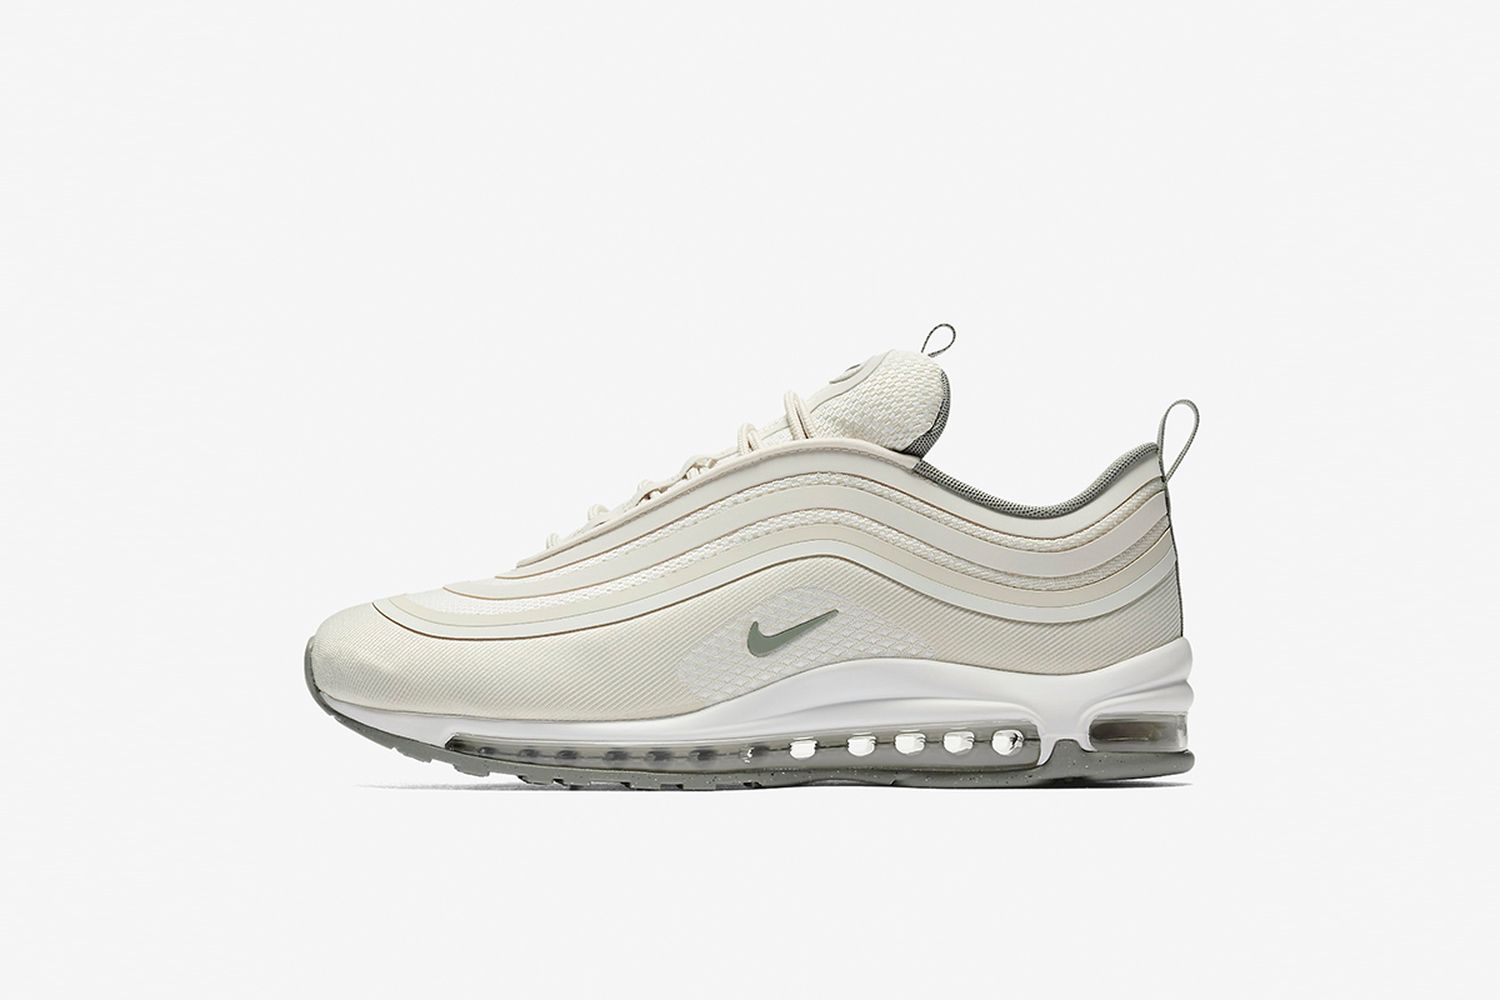 papel Maligno Bienvenido Here Are 9 of the Best Nike Air Max 97 Sneakers to Buy Right Now